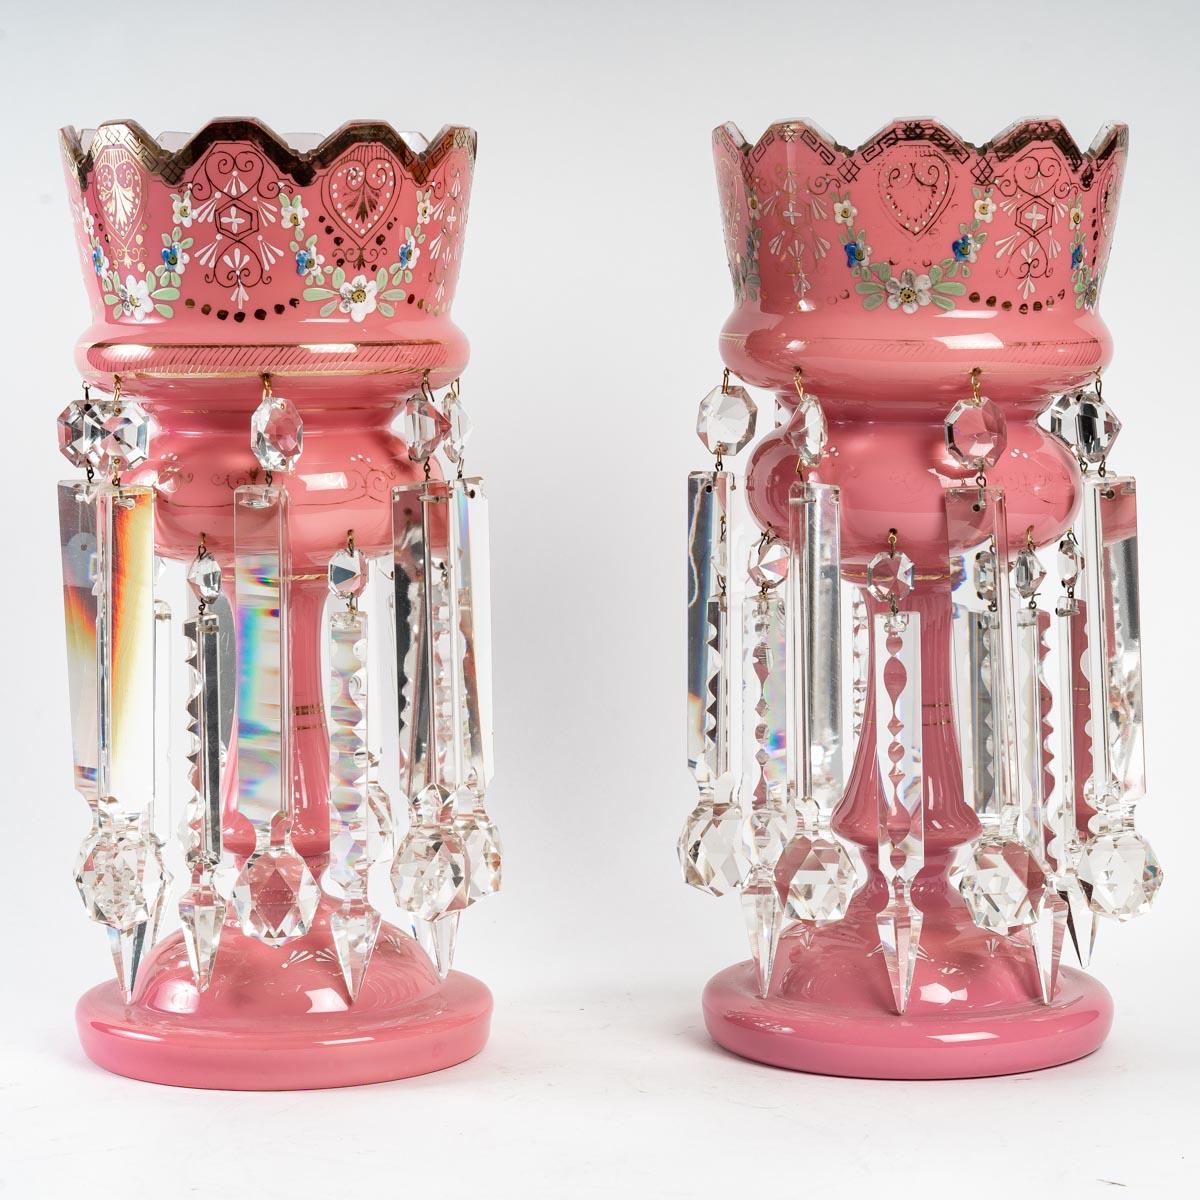 European Pair of Pink and White Opaline Pineapple-Holder, 19th Century